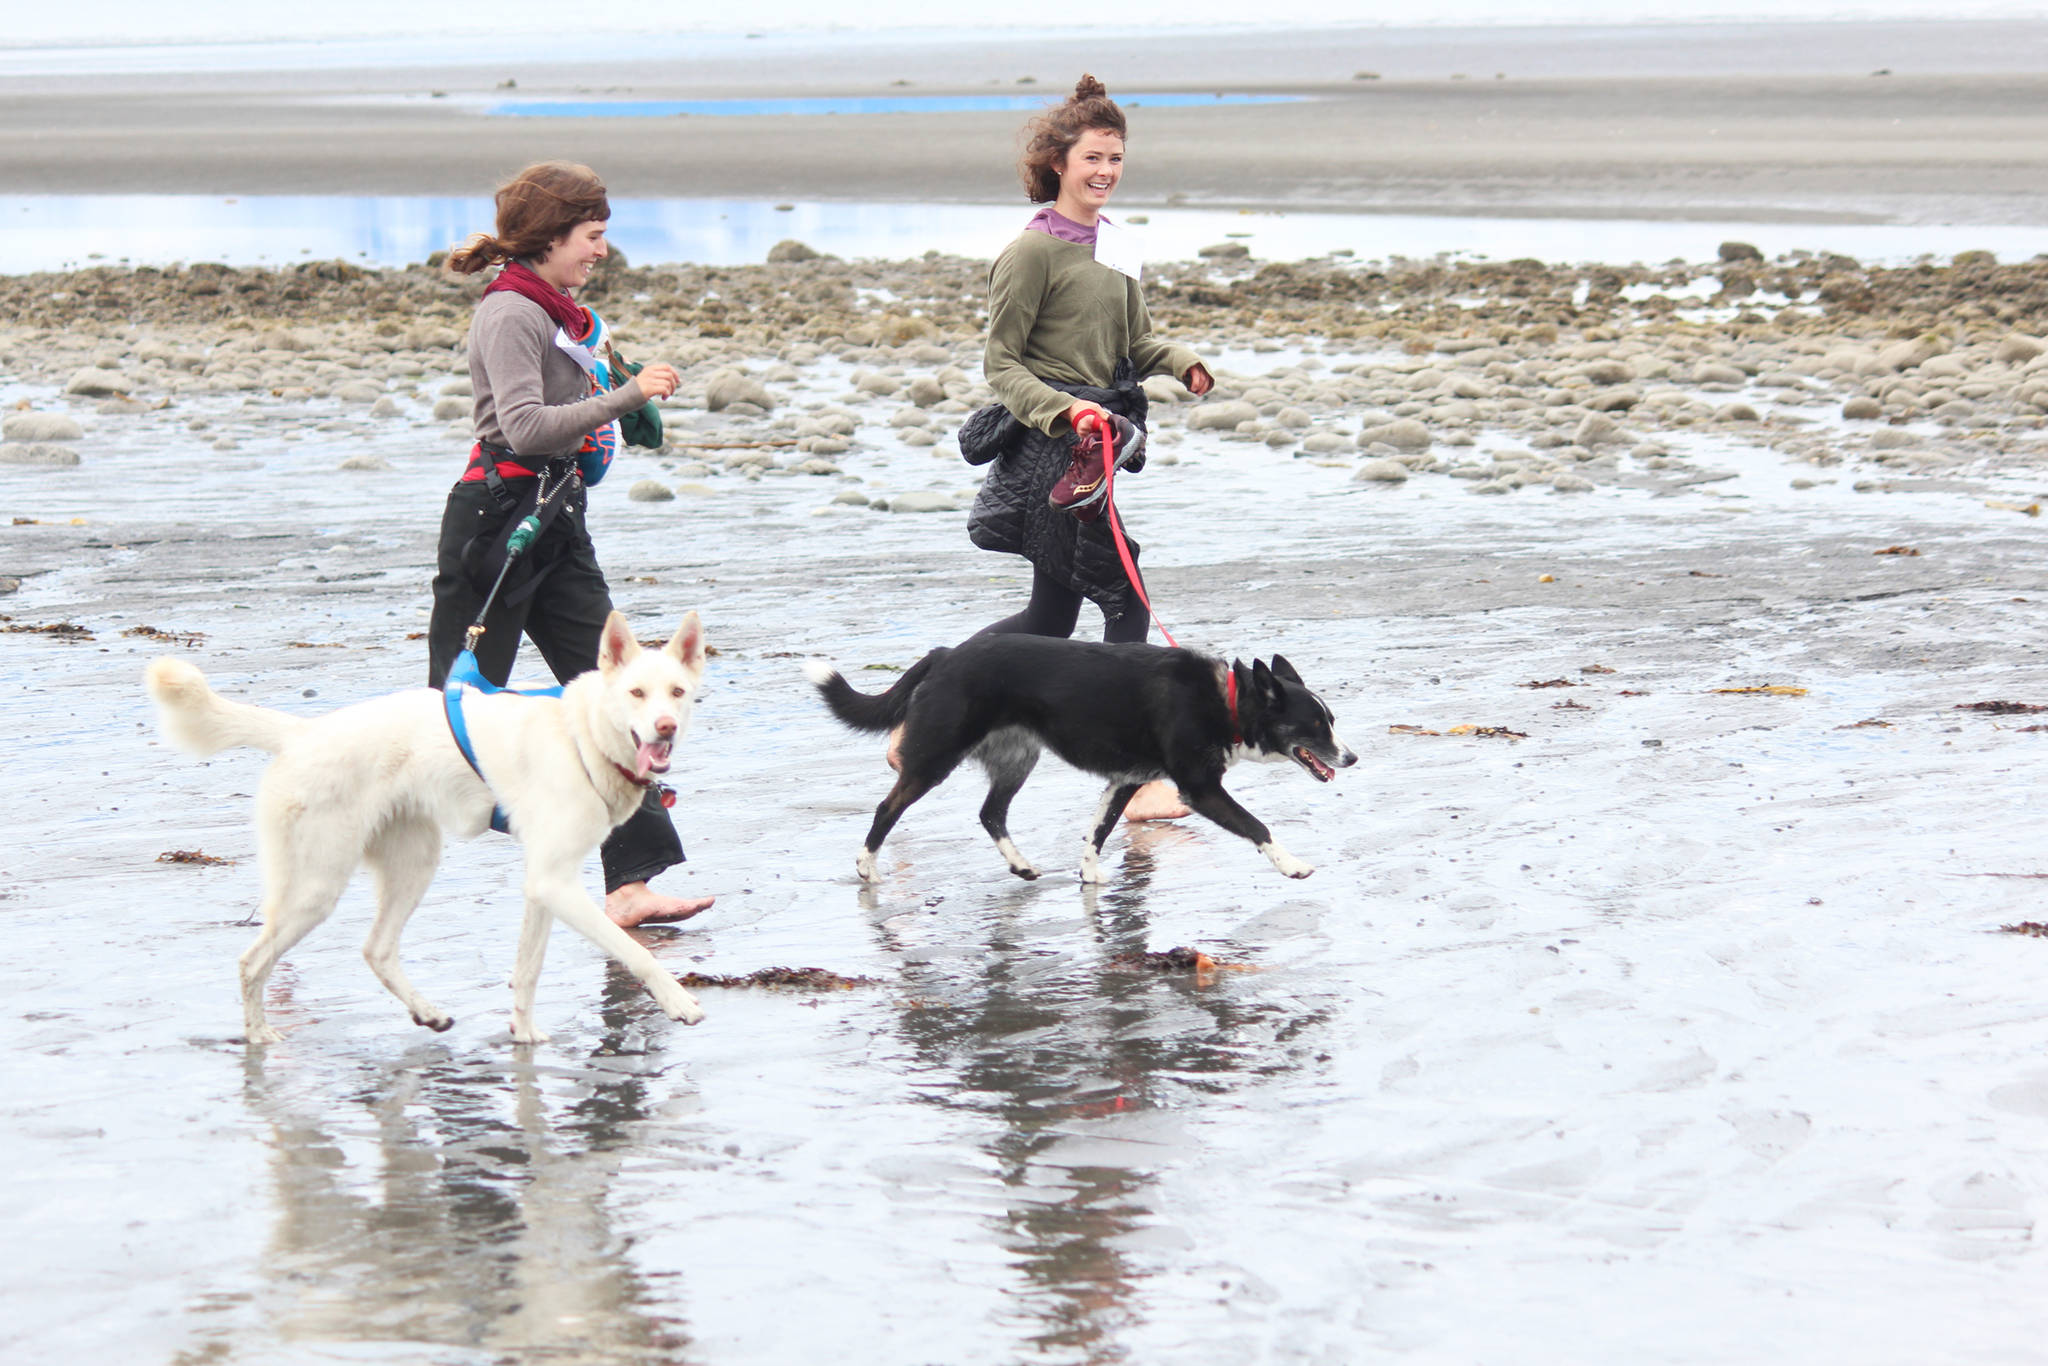 Marie Lapointe (left) and Ashley Davidson (right) run to the finish line of the Chariots of Fur 5K with their dogs Freyja and Z, respectively, Saturday, July 14, 2018 near Mariner Park in Homer, Alaska. (Photo by Megan Pacer/Homer News)